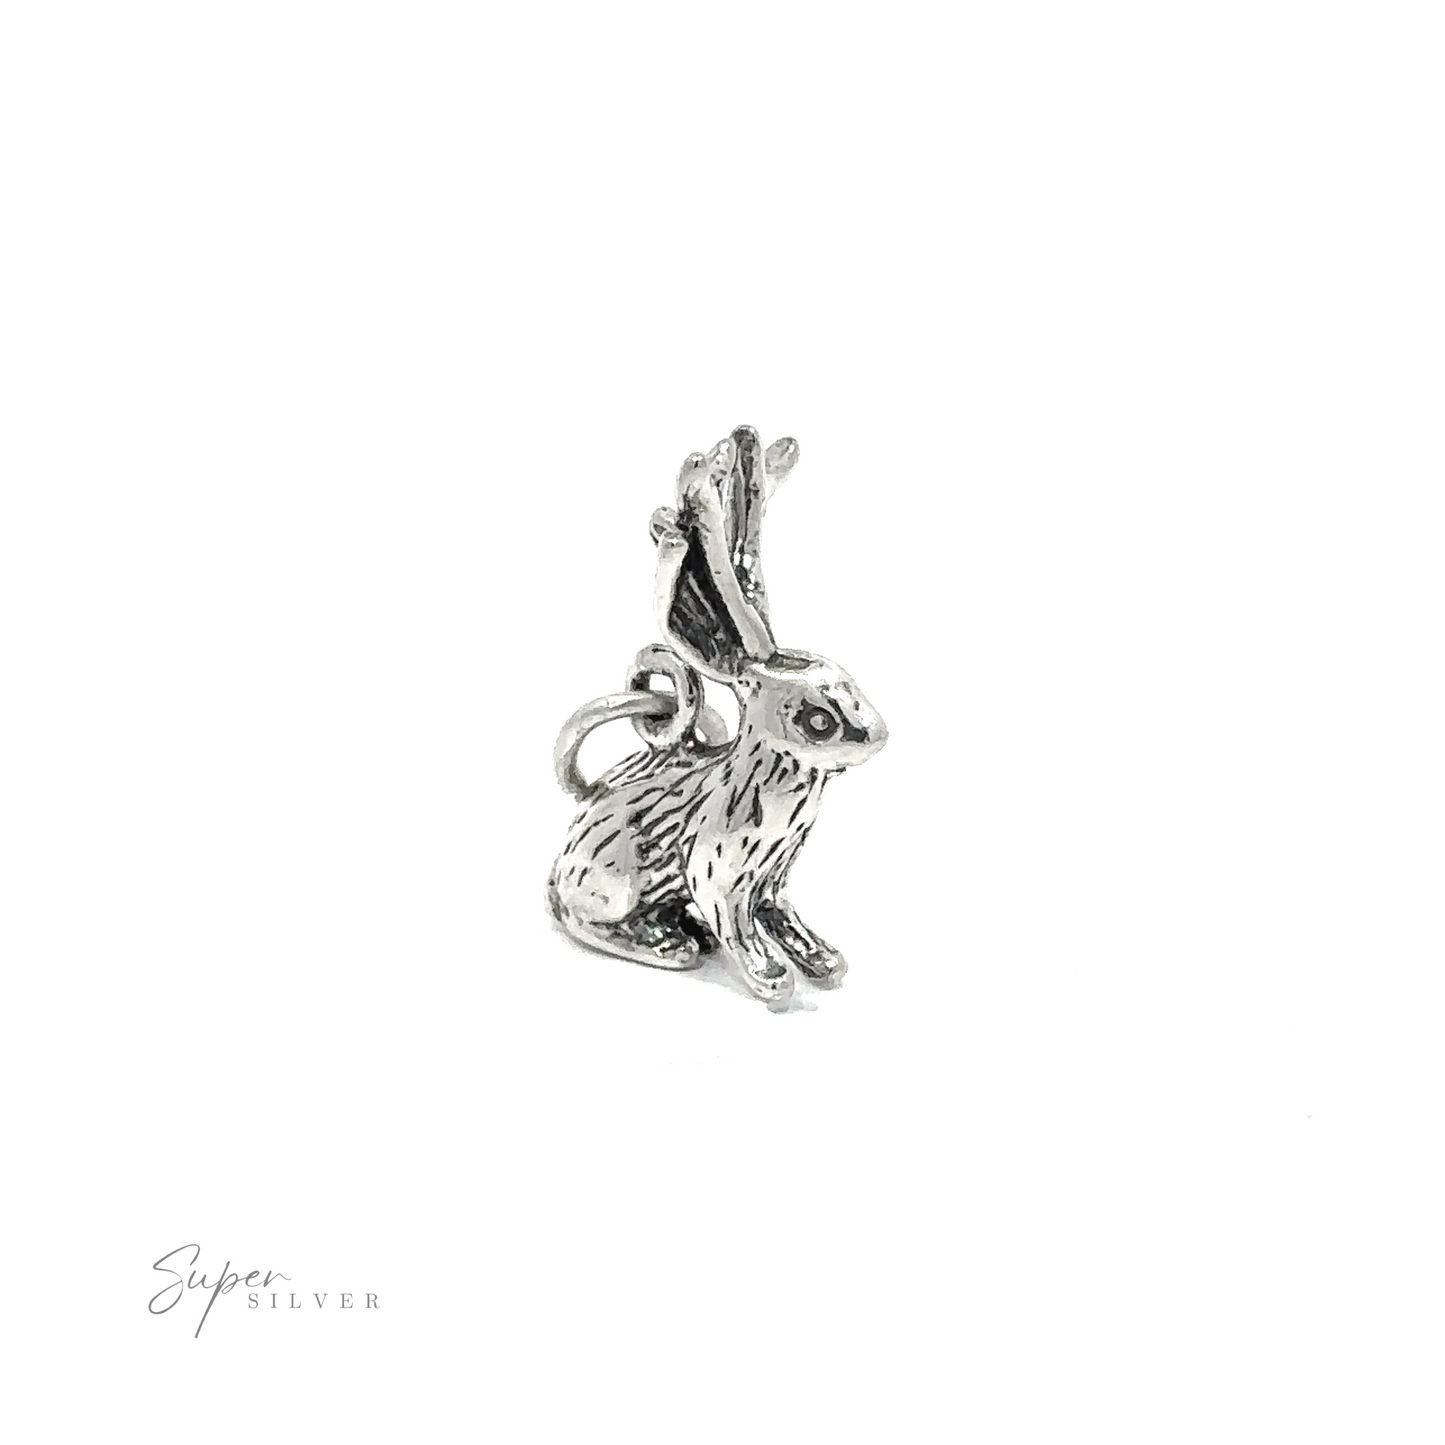 Silver Jackalope Charm with intricate detailing on a white background.